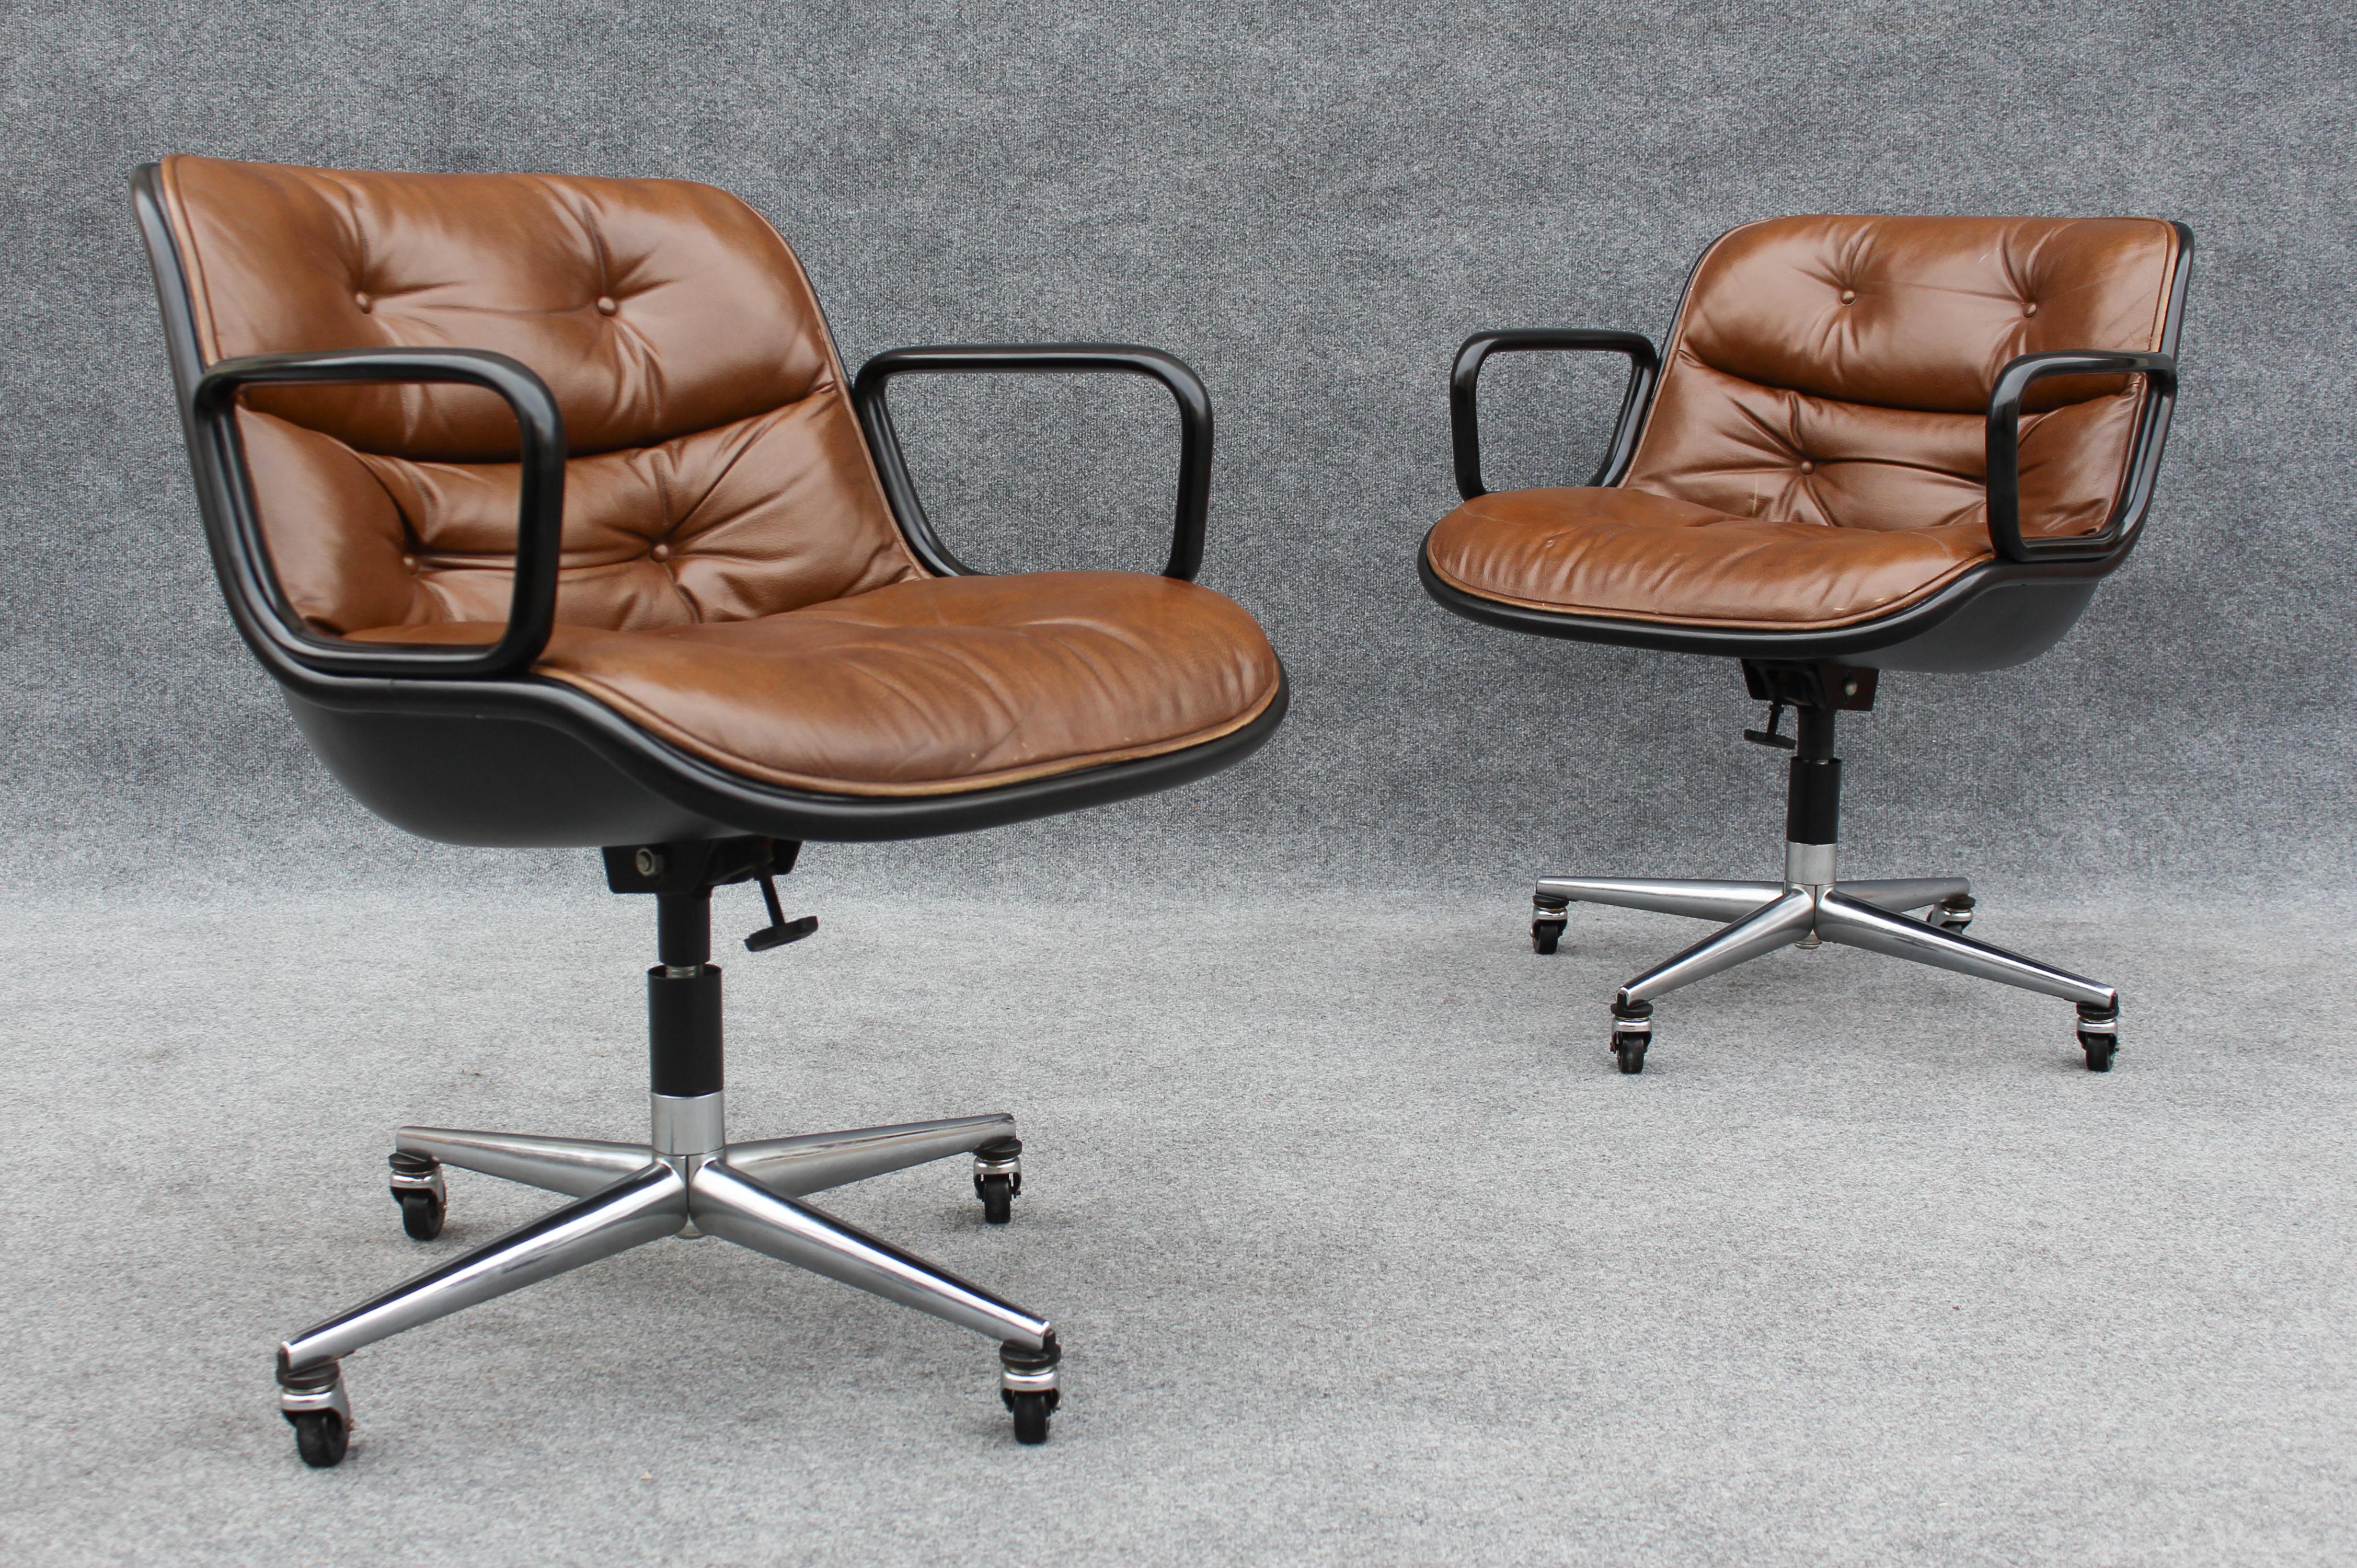 Pair of Charles Pollock for Knoll Arm or Desk Chairs in Brown Leather & Black 1